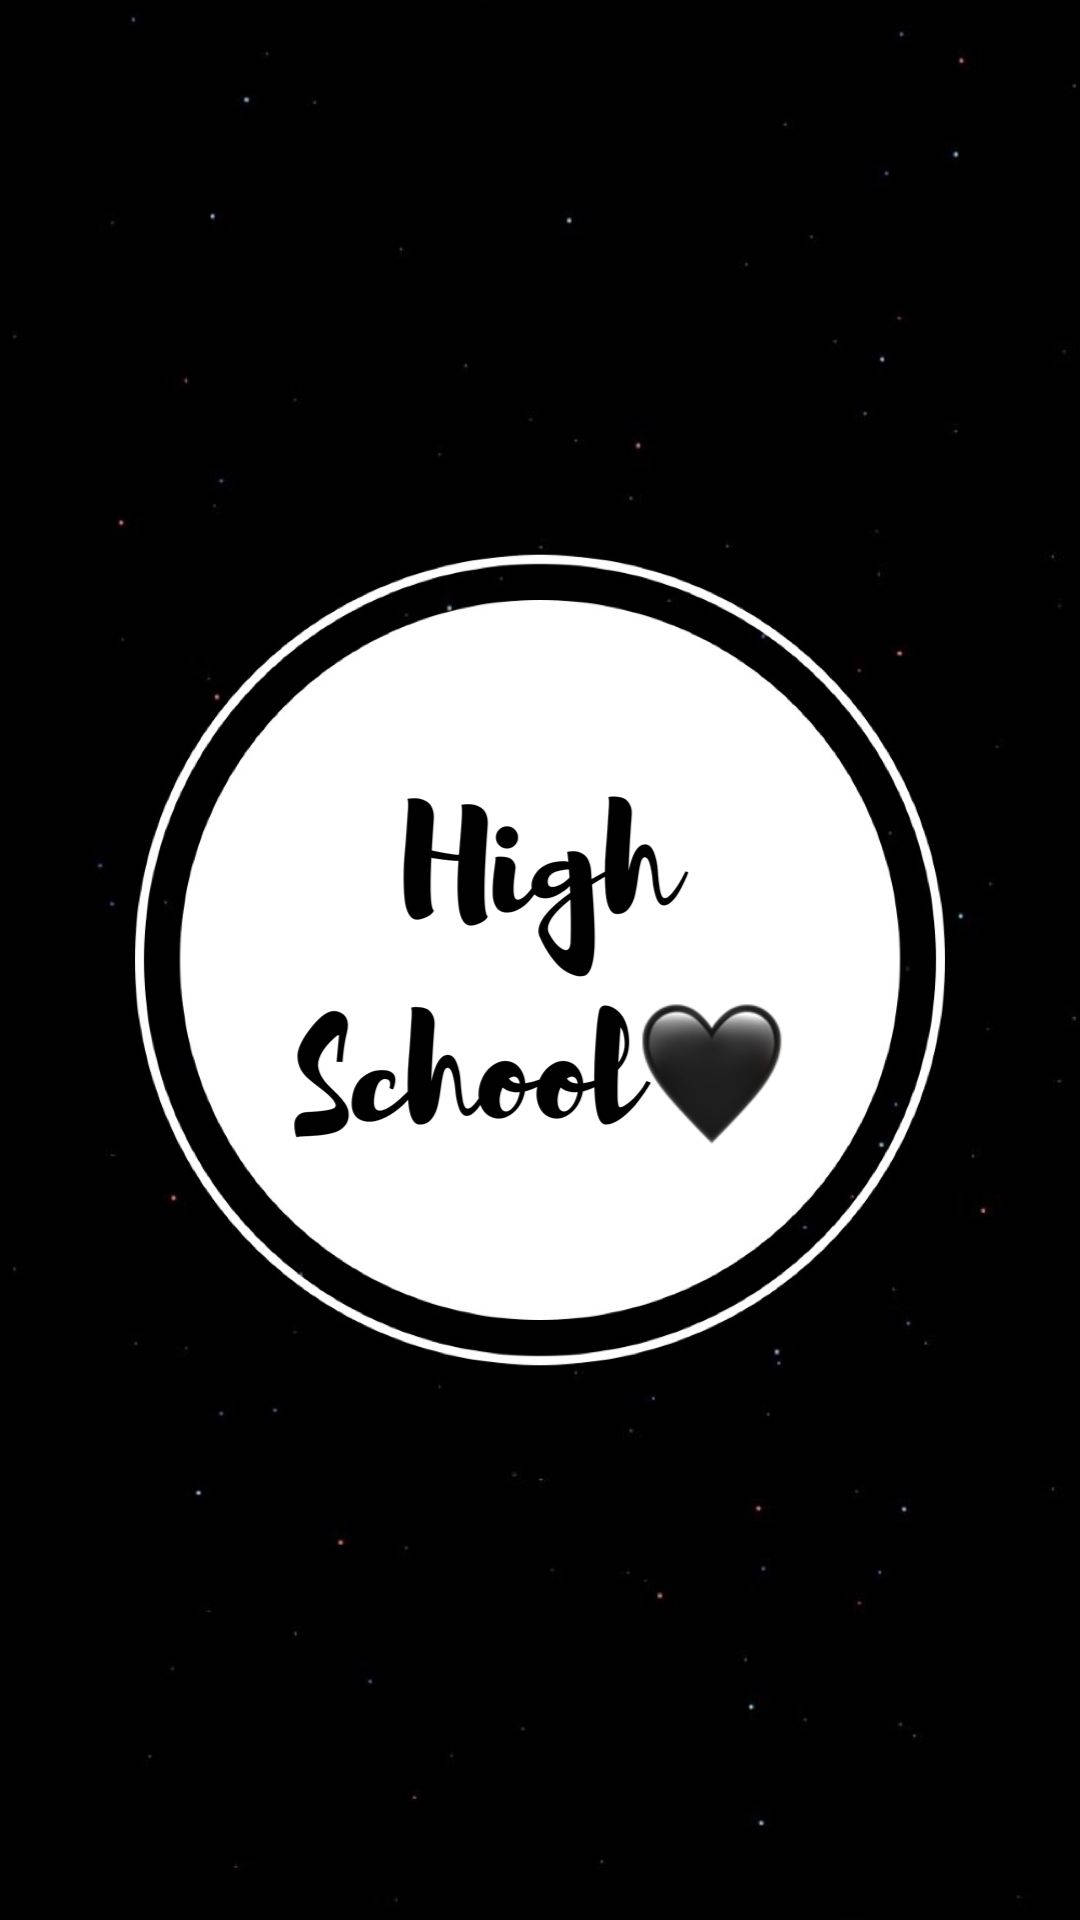 High School With A Black Heart